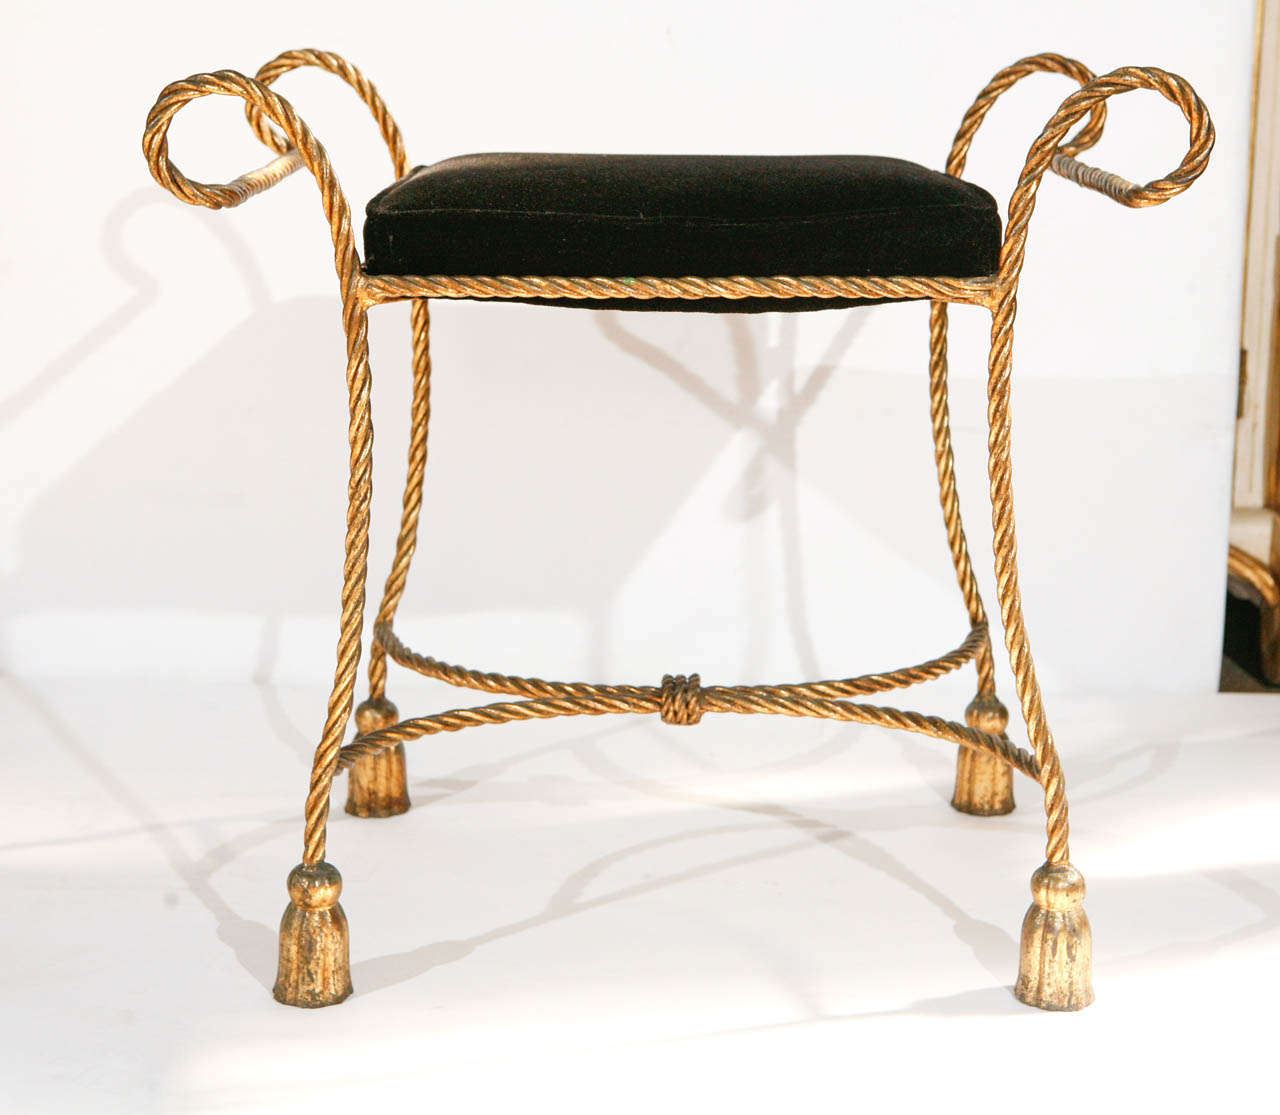 Vintage Italian gilded rope and tassel bench. Seat has been reupholstered in black mohair. Some wear to the gilding consistent with age.